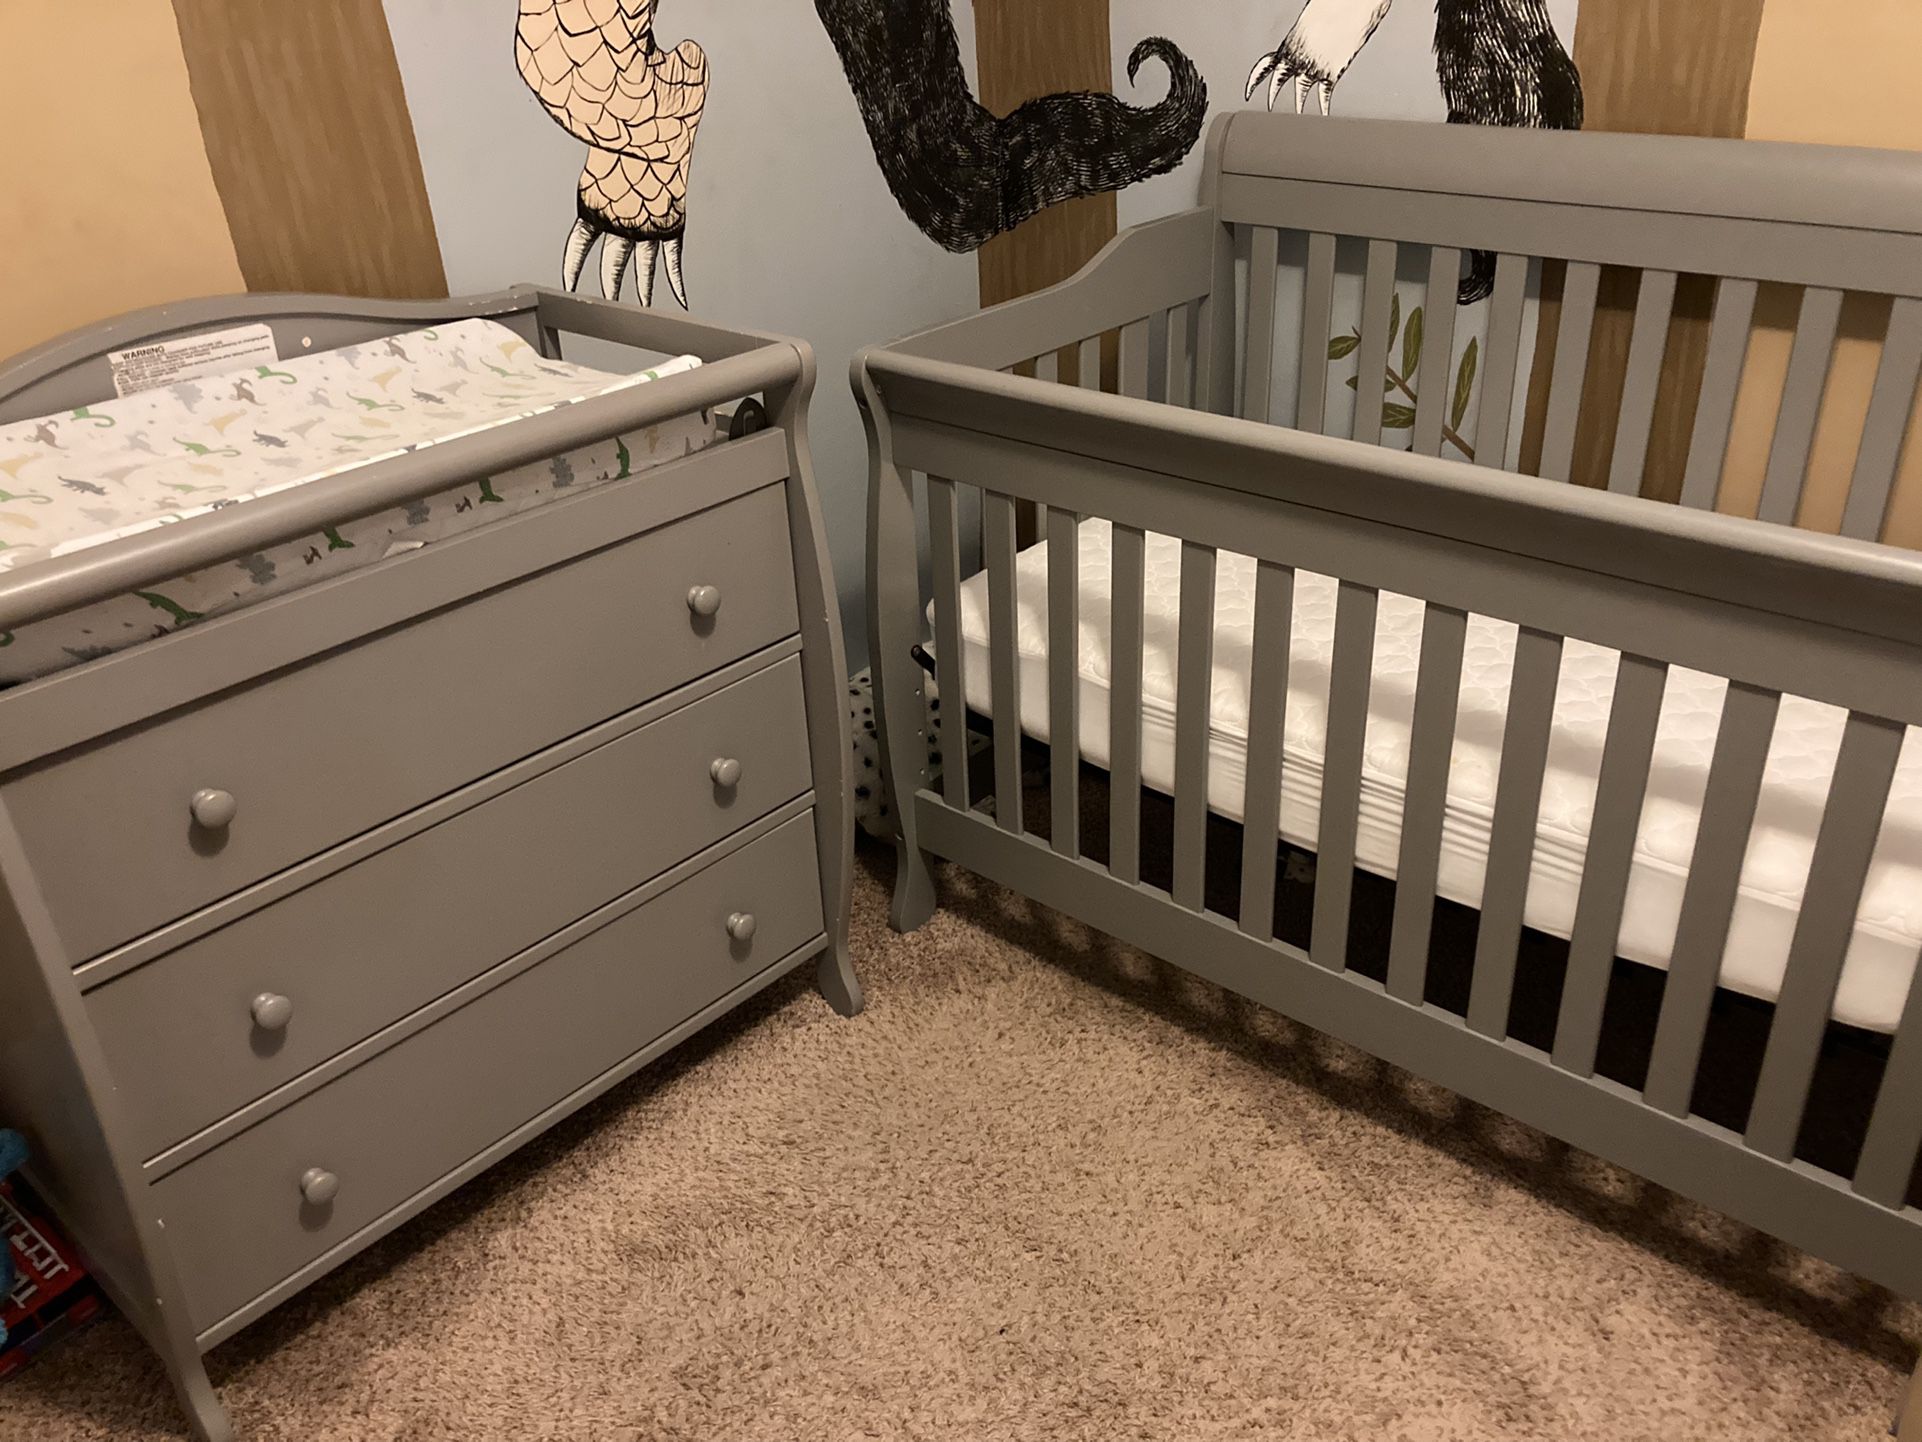 Crib, Dresser w/ Changing Table, Leather Recliner